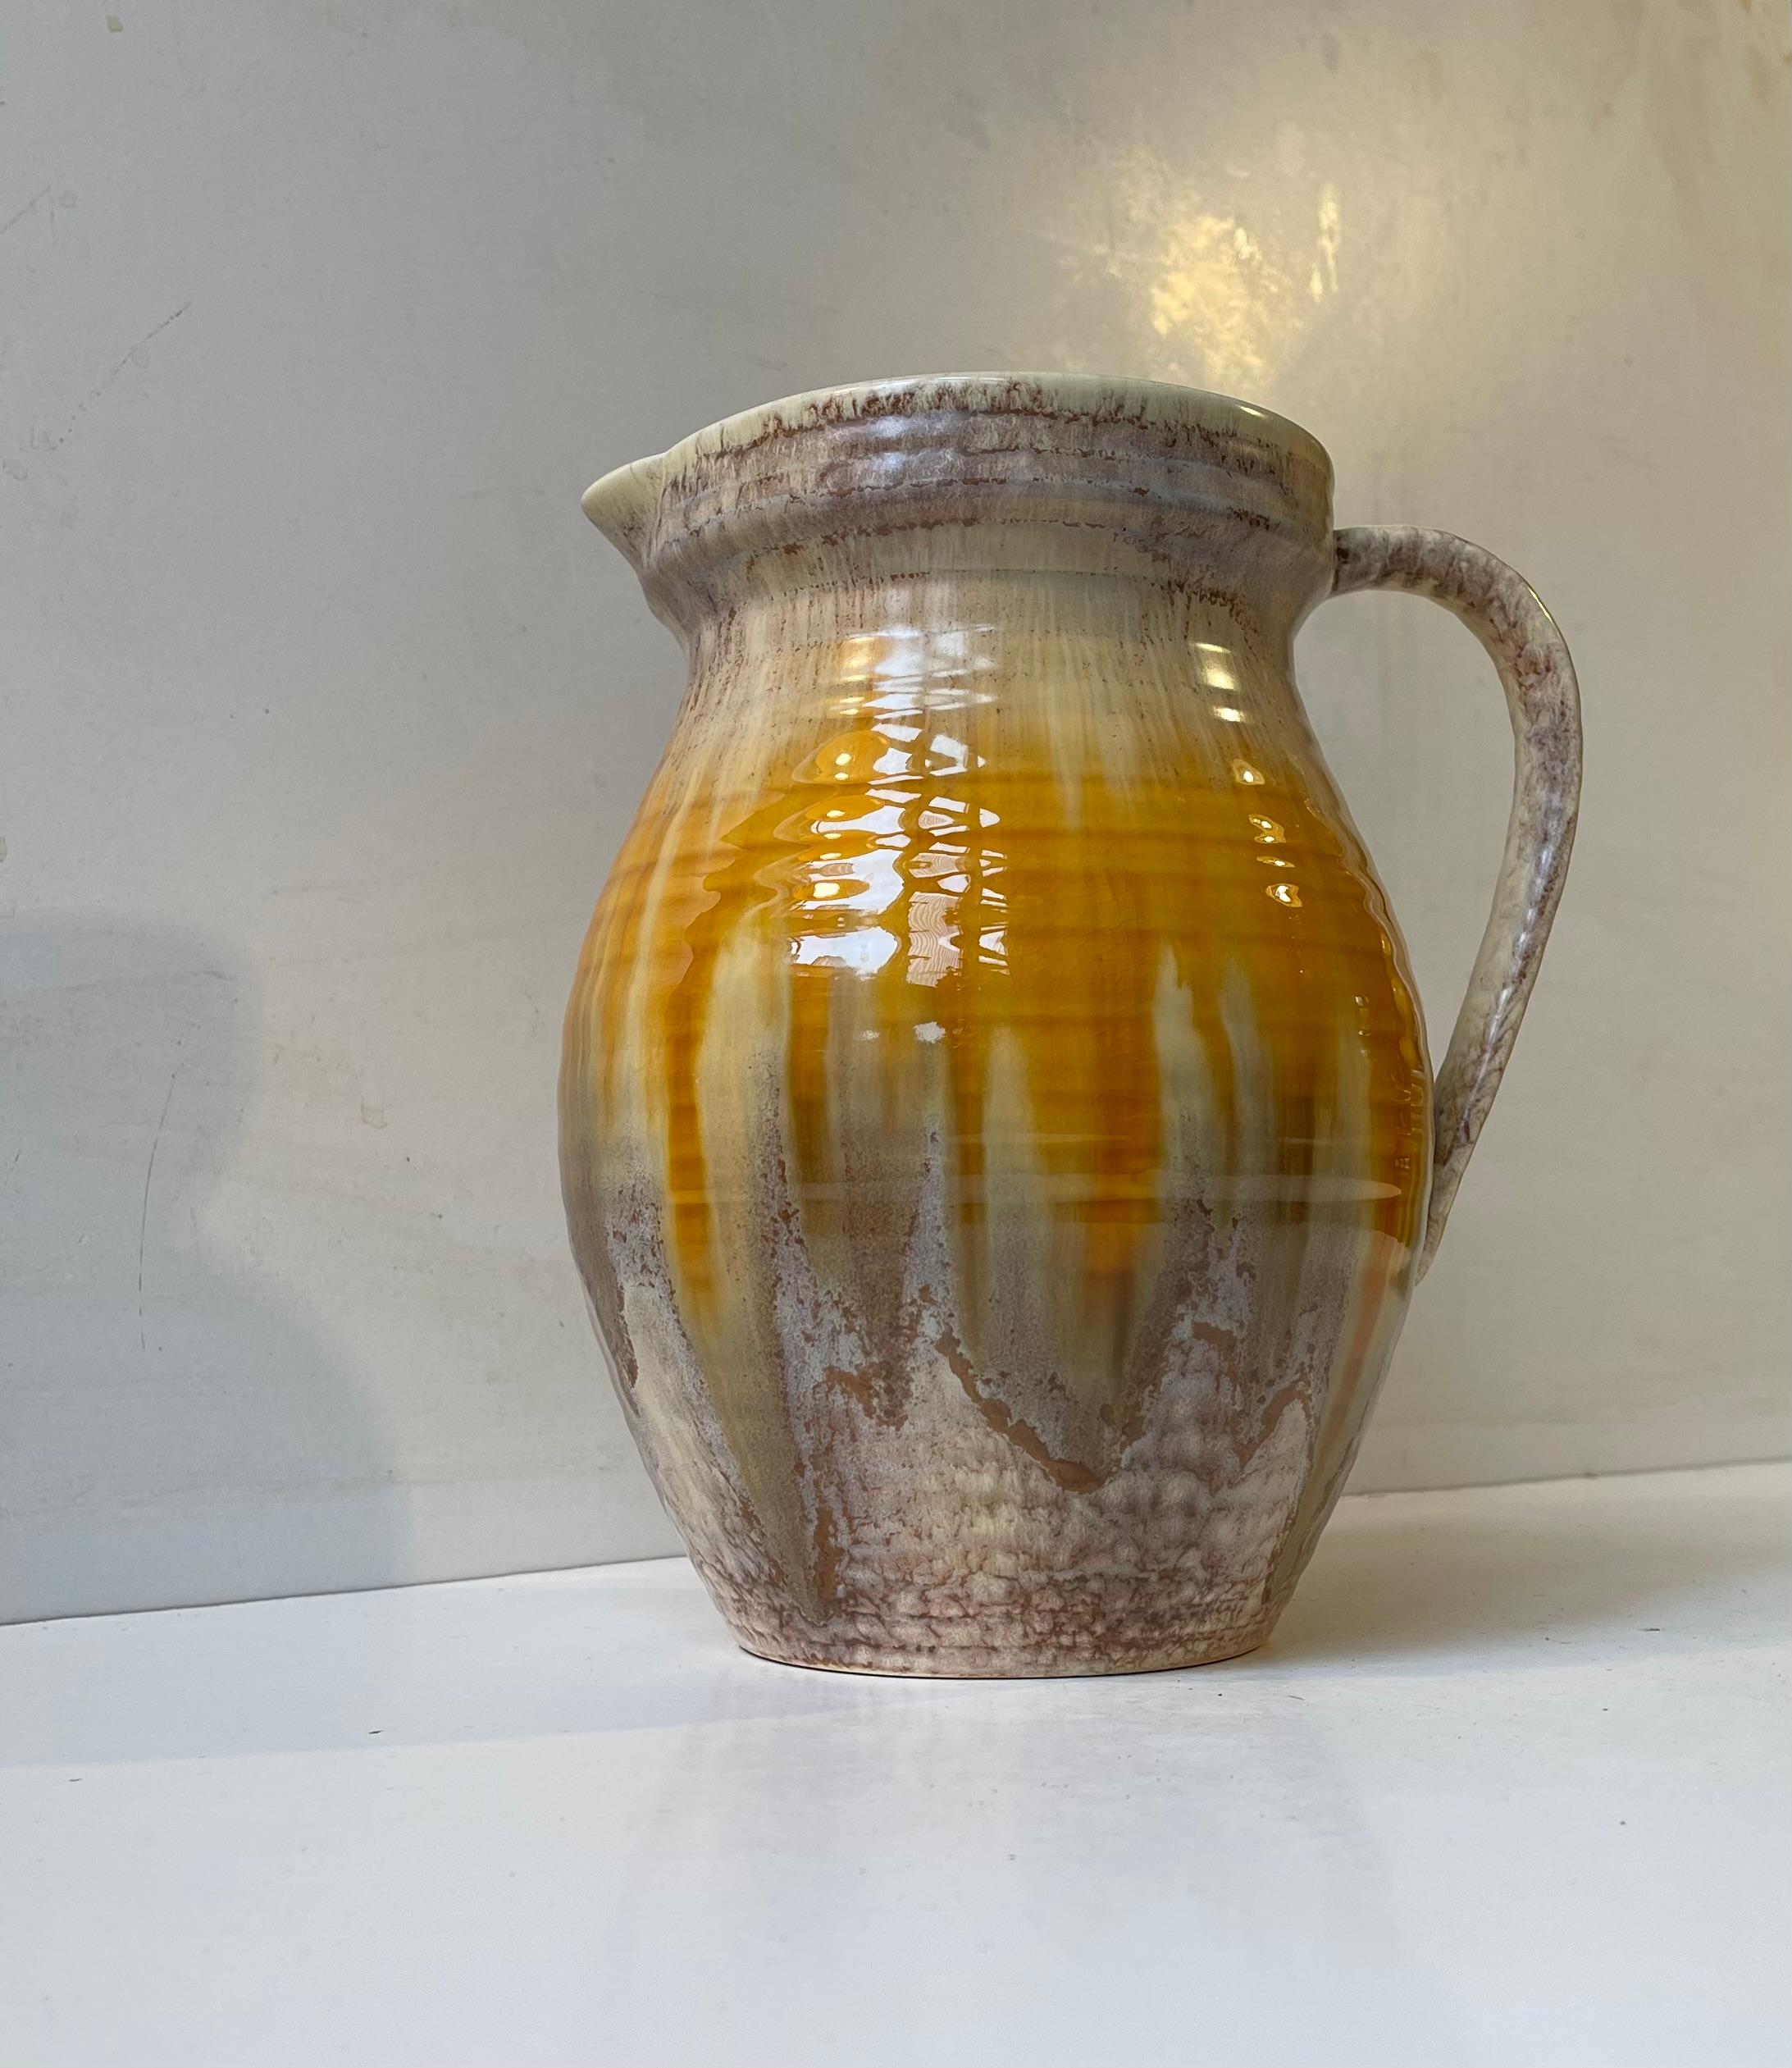 A striking almost monumental pottery jug from Sylvac, England. This design 1410 dates back to the 1930s and it features delicate bone-texture-like brown and yellow glazes. A beautiful ornamental piece for functionalist or Art Deco interiors. It is